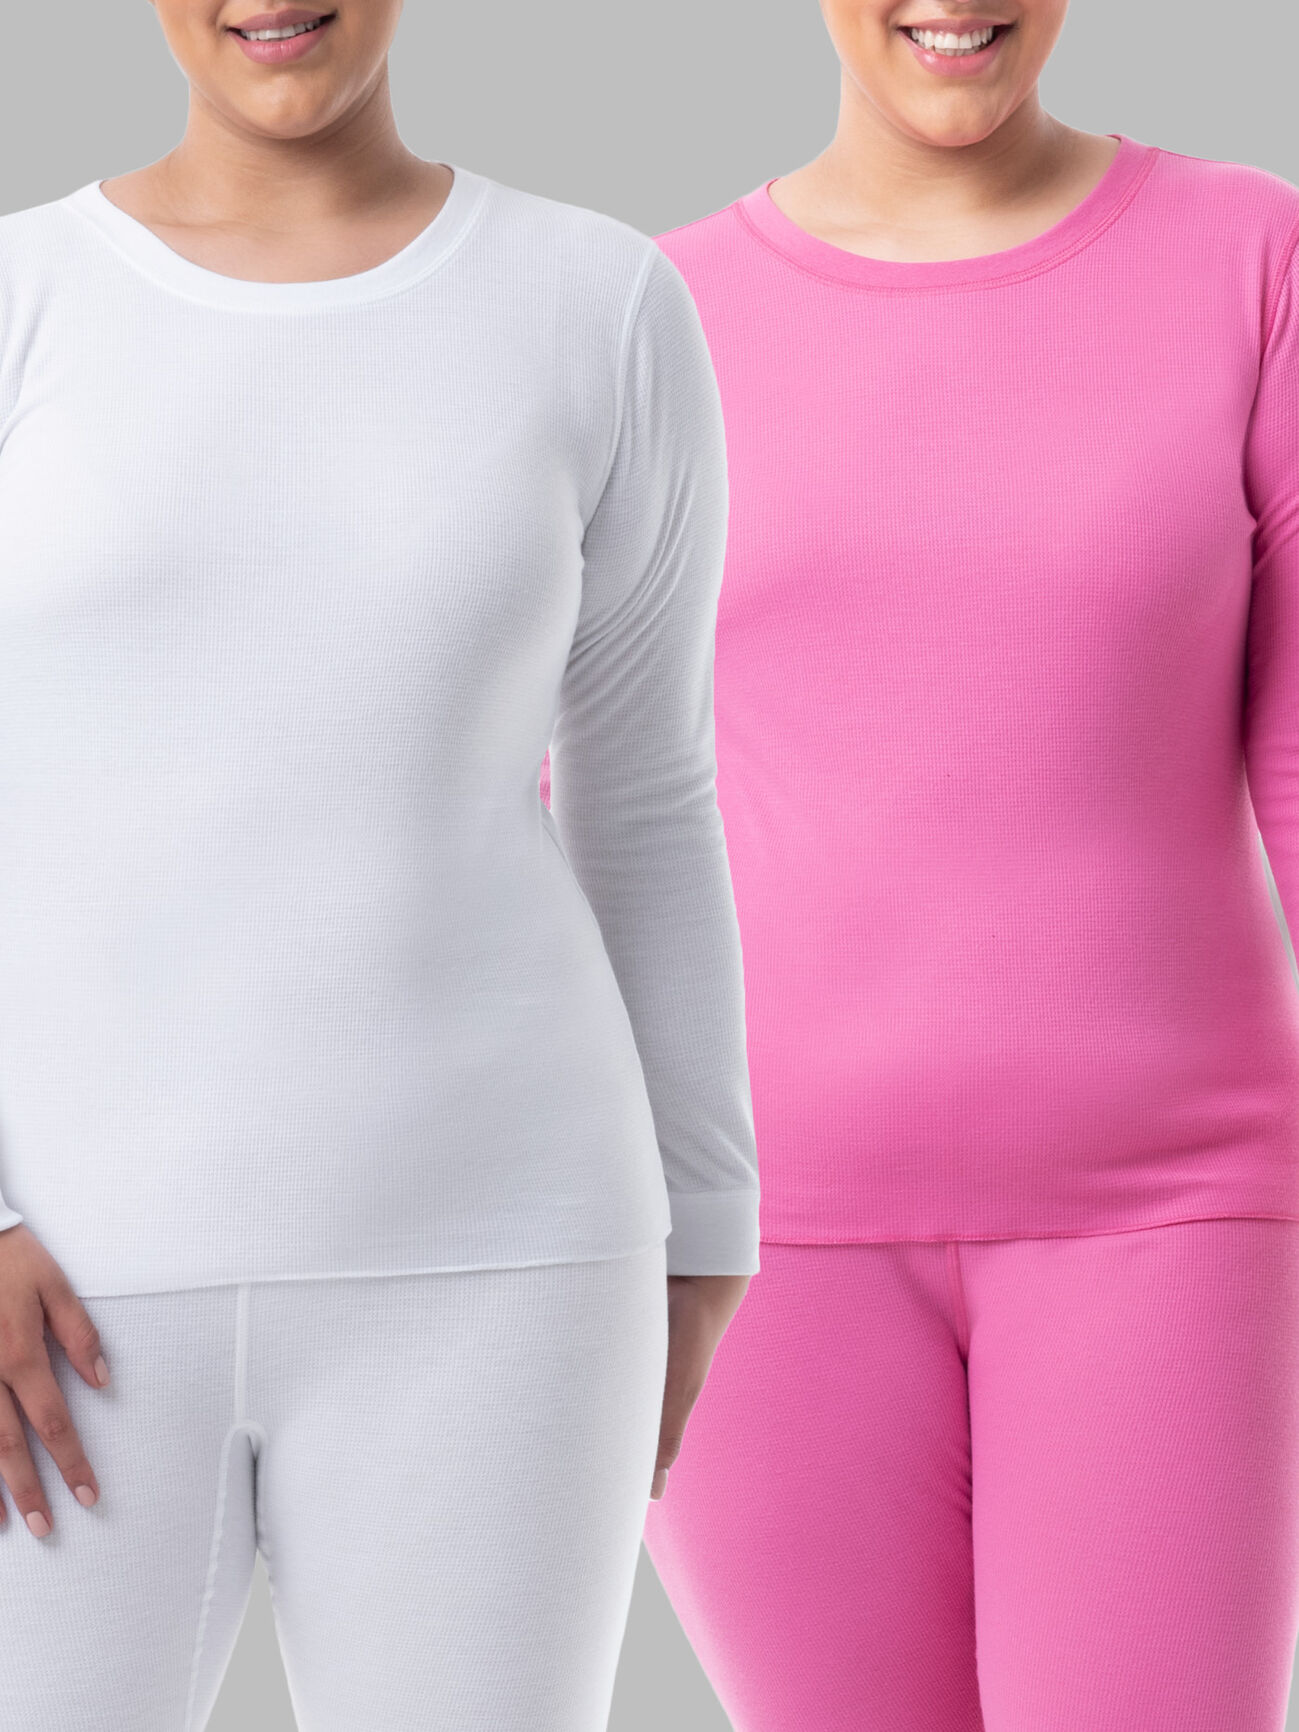 Fruit Of The Loom Women's 2-pack Waffle Thermal Underwear Bottom